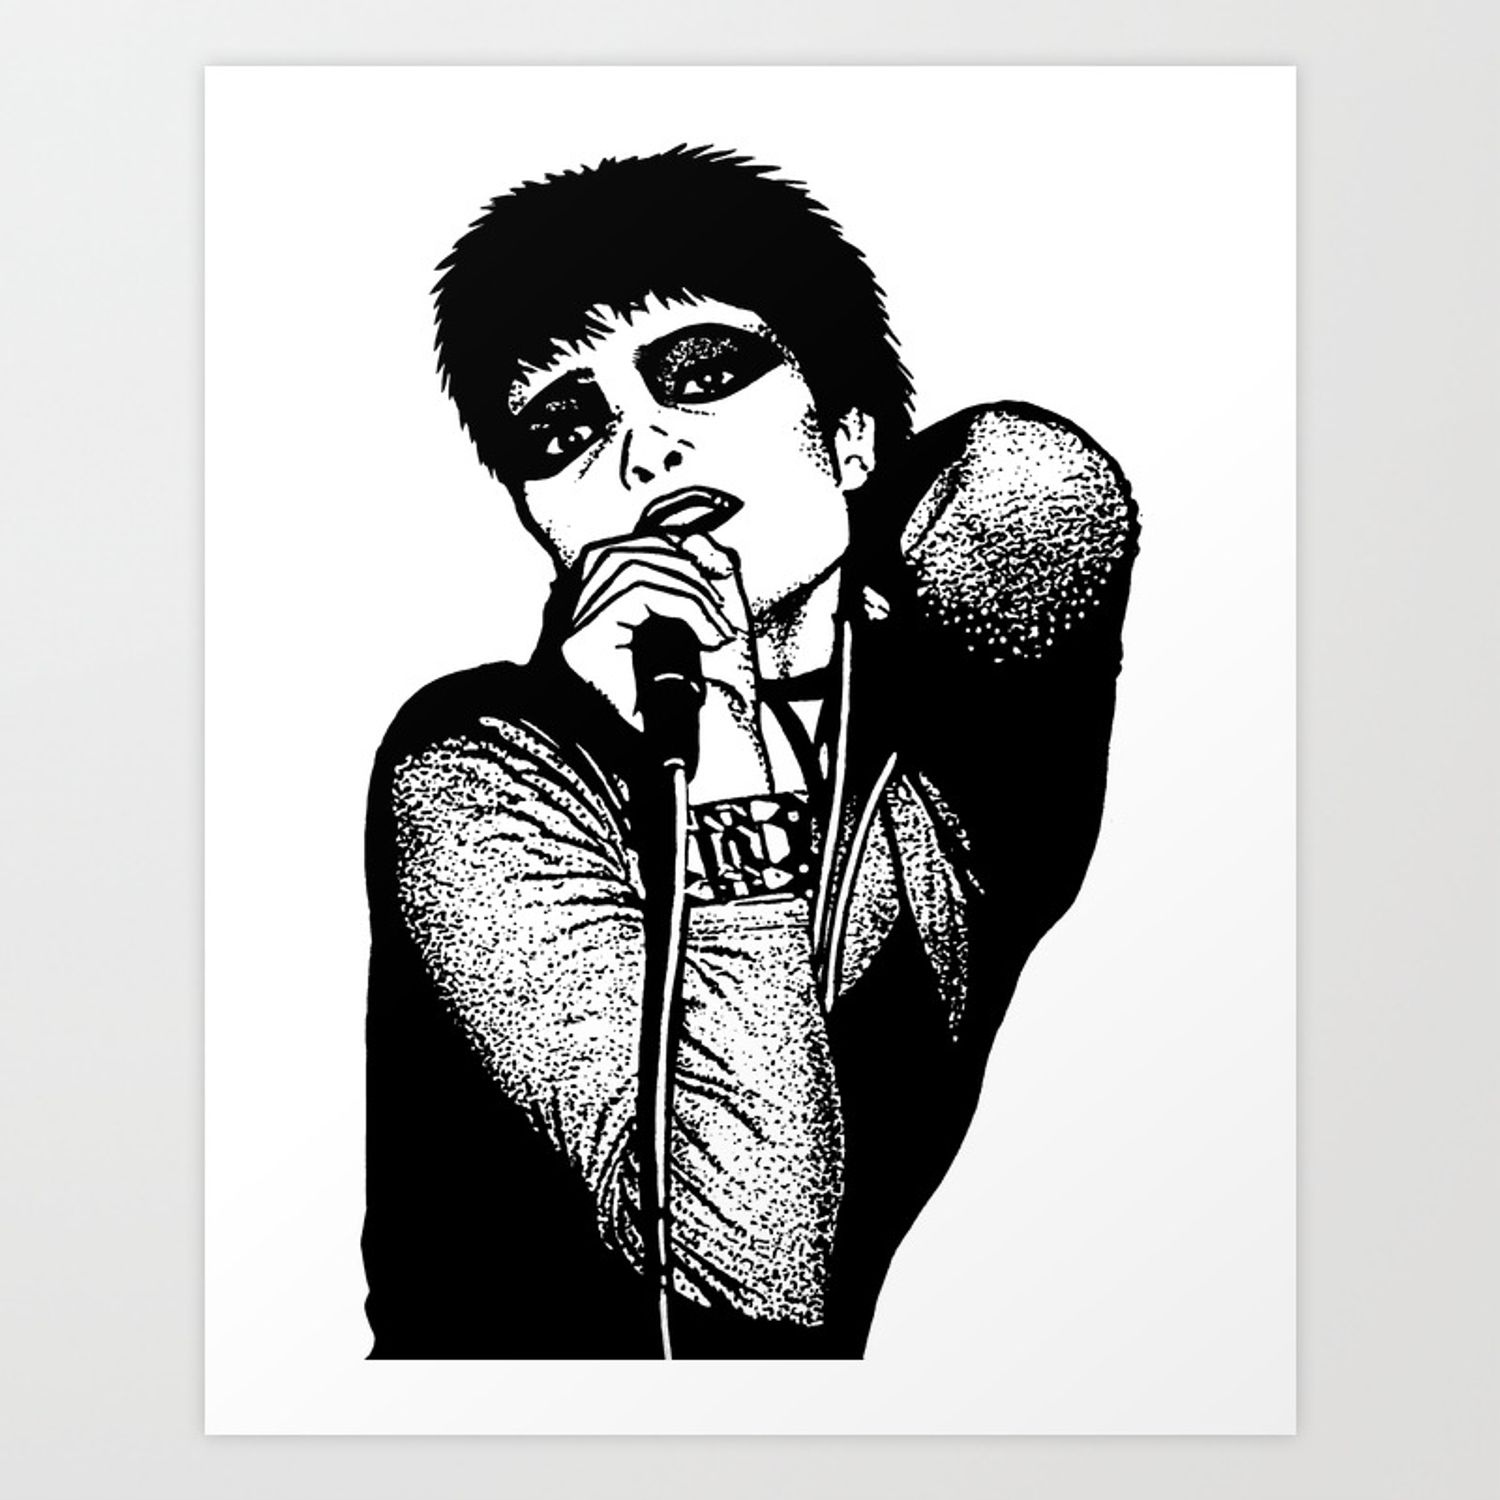 Siouxsie Sioux of Siouxsie and the Banshees Art Print by Is This Tomorrow?